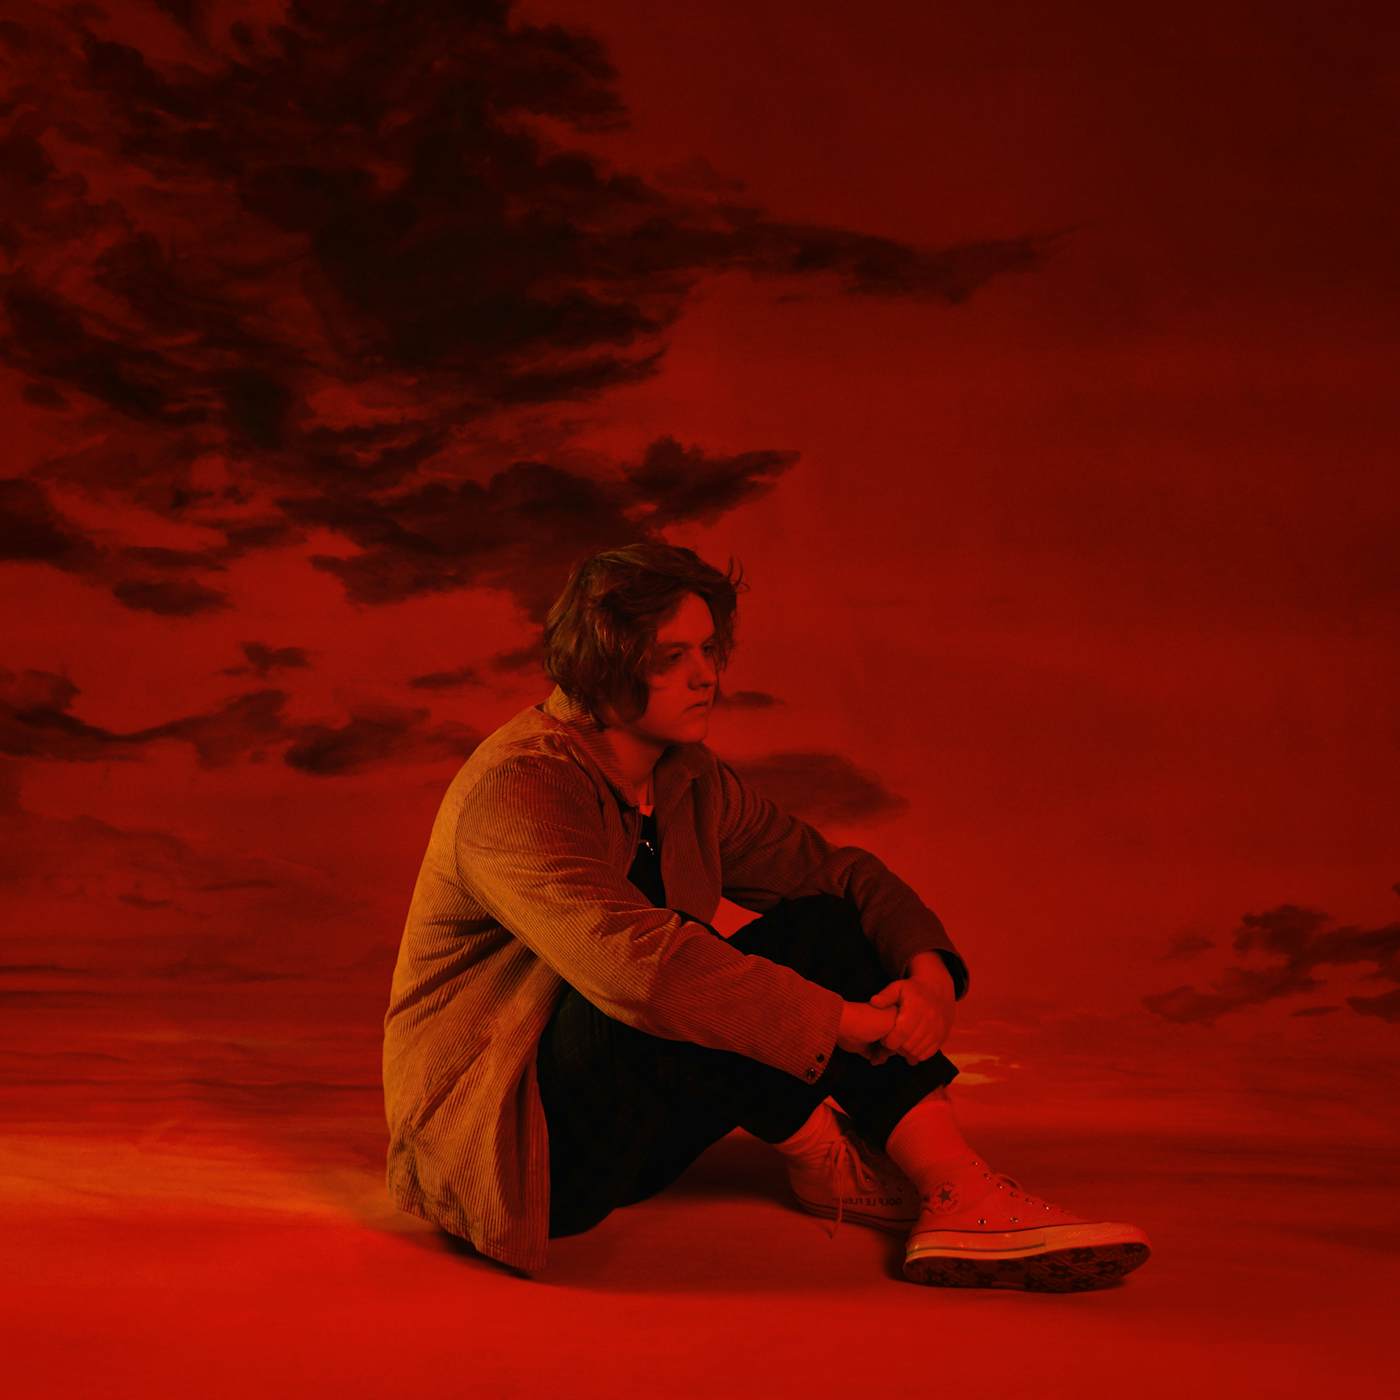 Divinely Uninspired To A Hellish Extent (CD) – Lewis Capaldi Shop